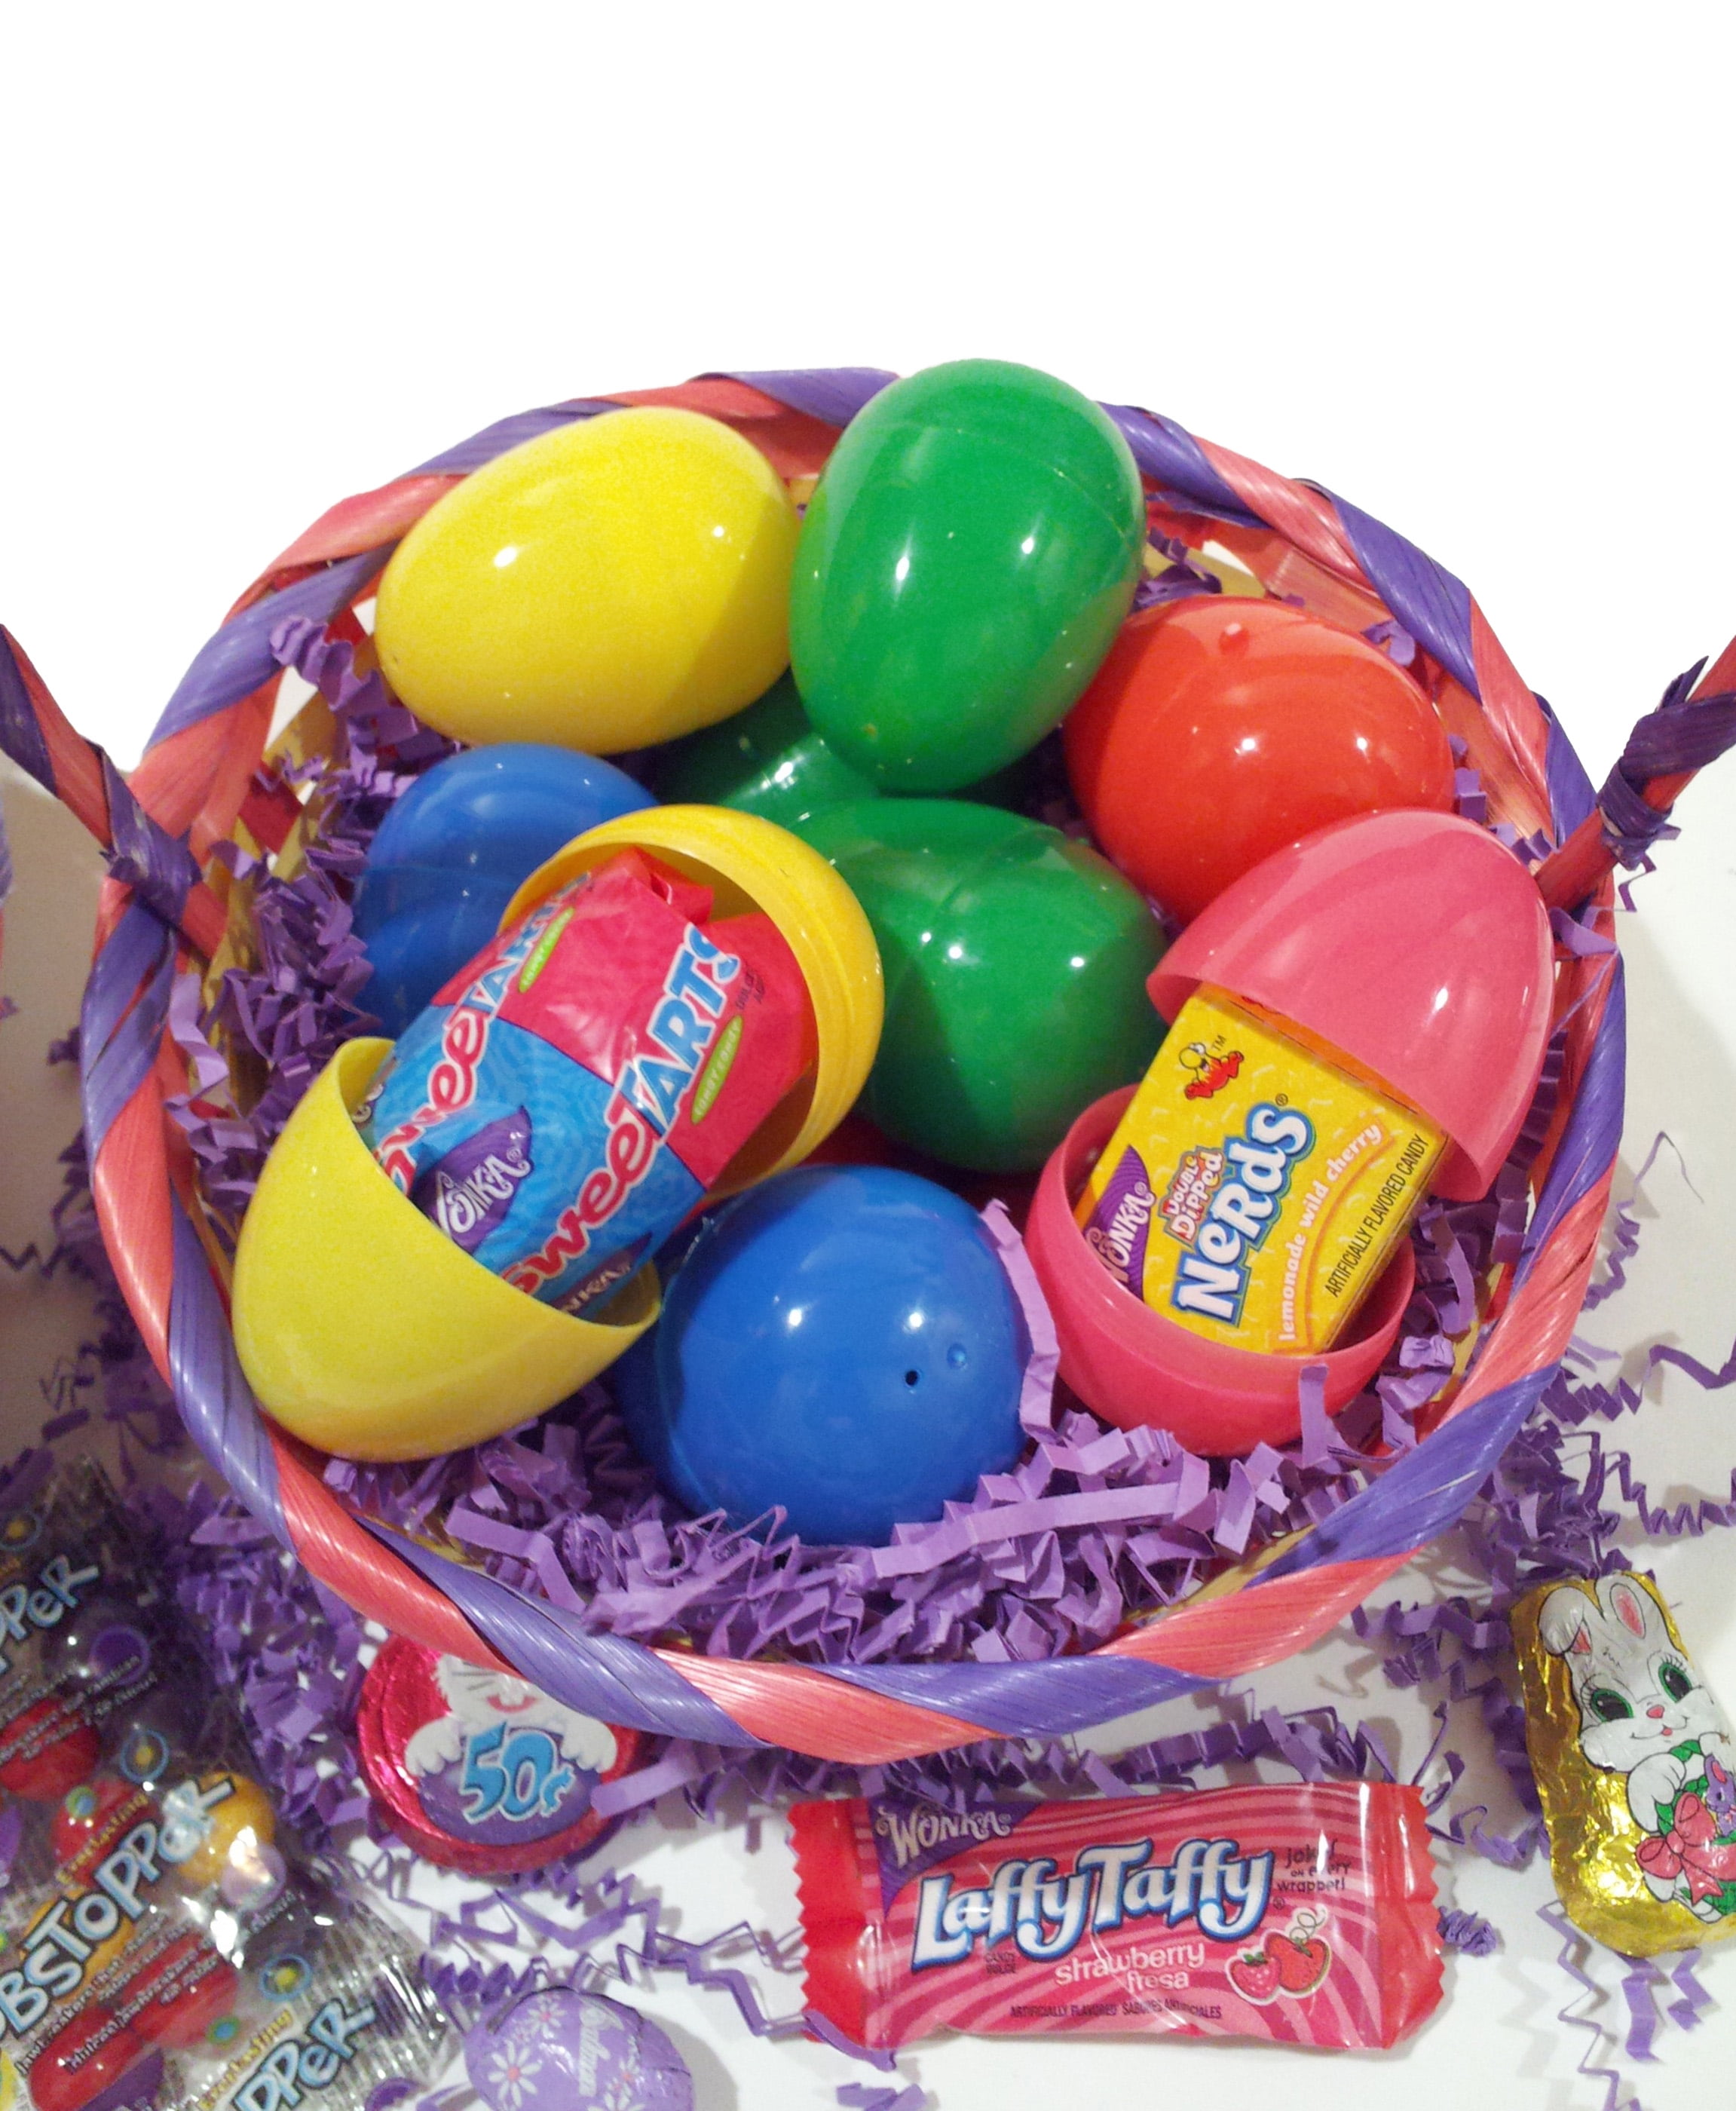 25 Filled Solid Easter Eggs for Egg Hunt w Brand Candies, Chocolates